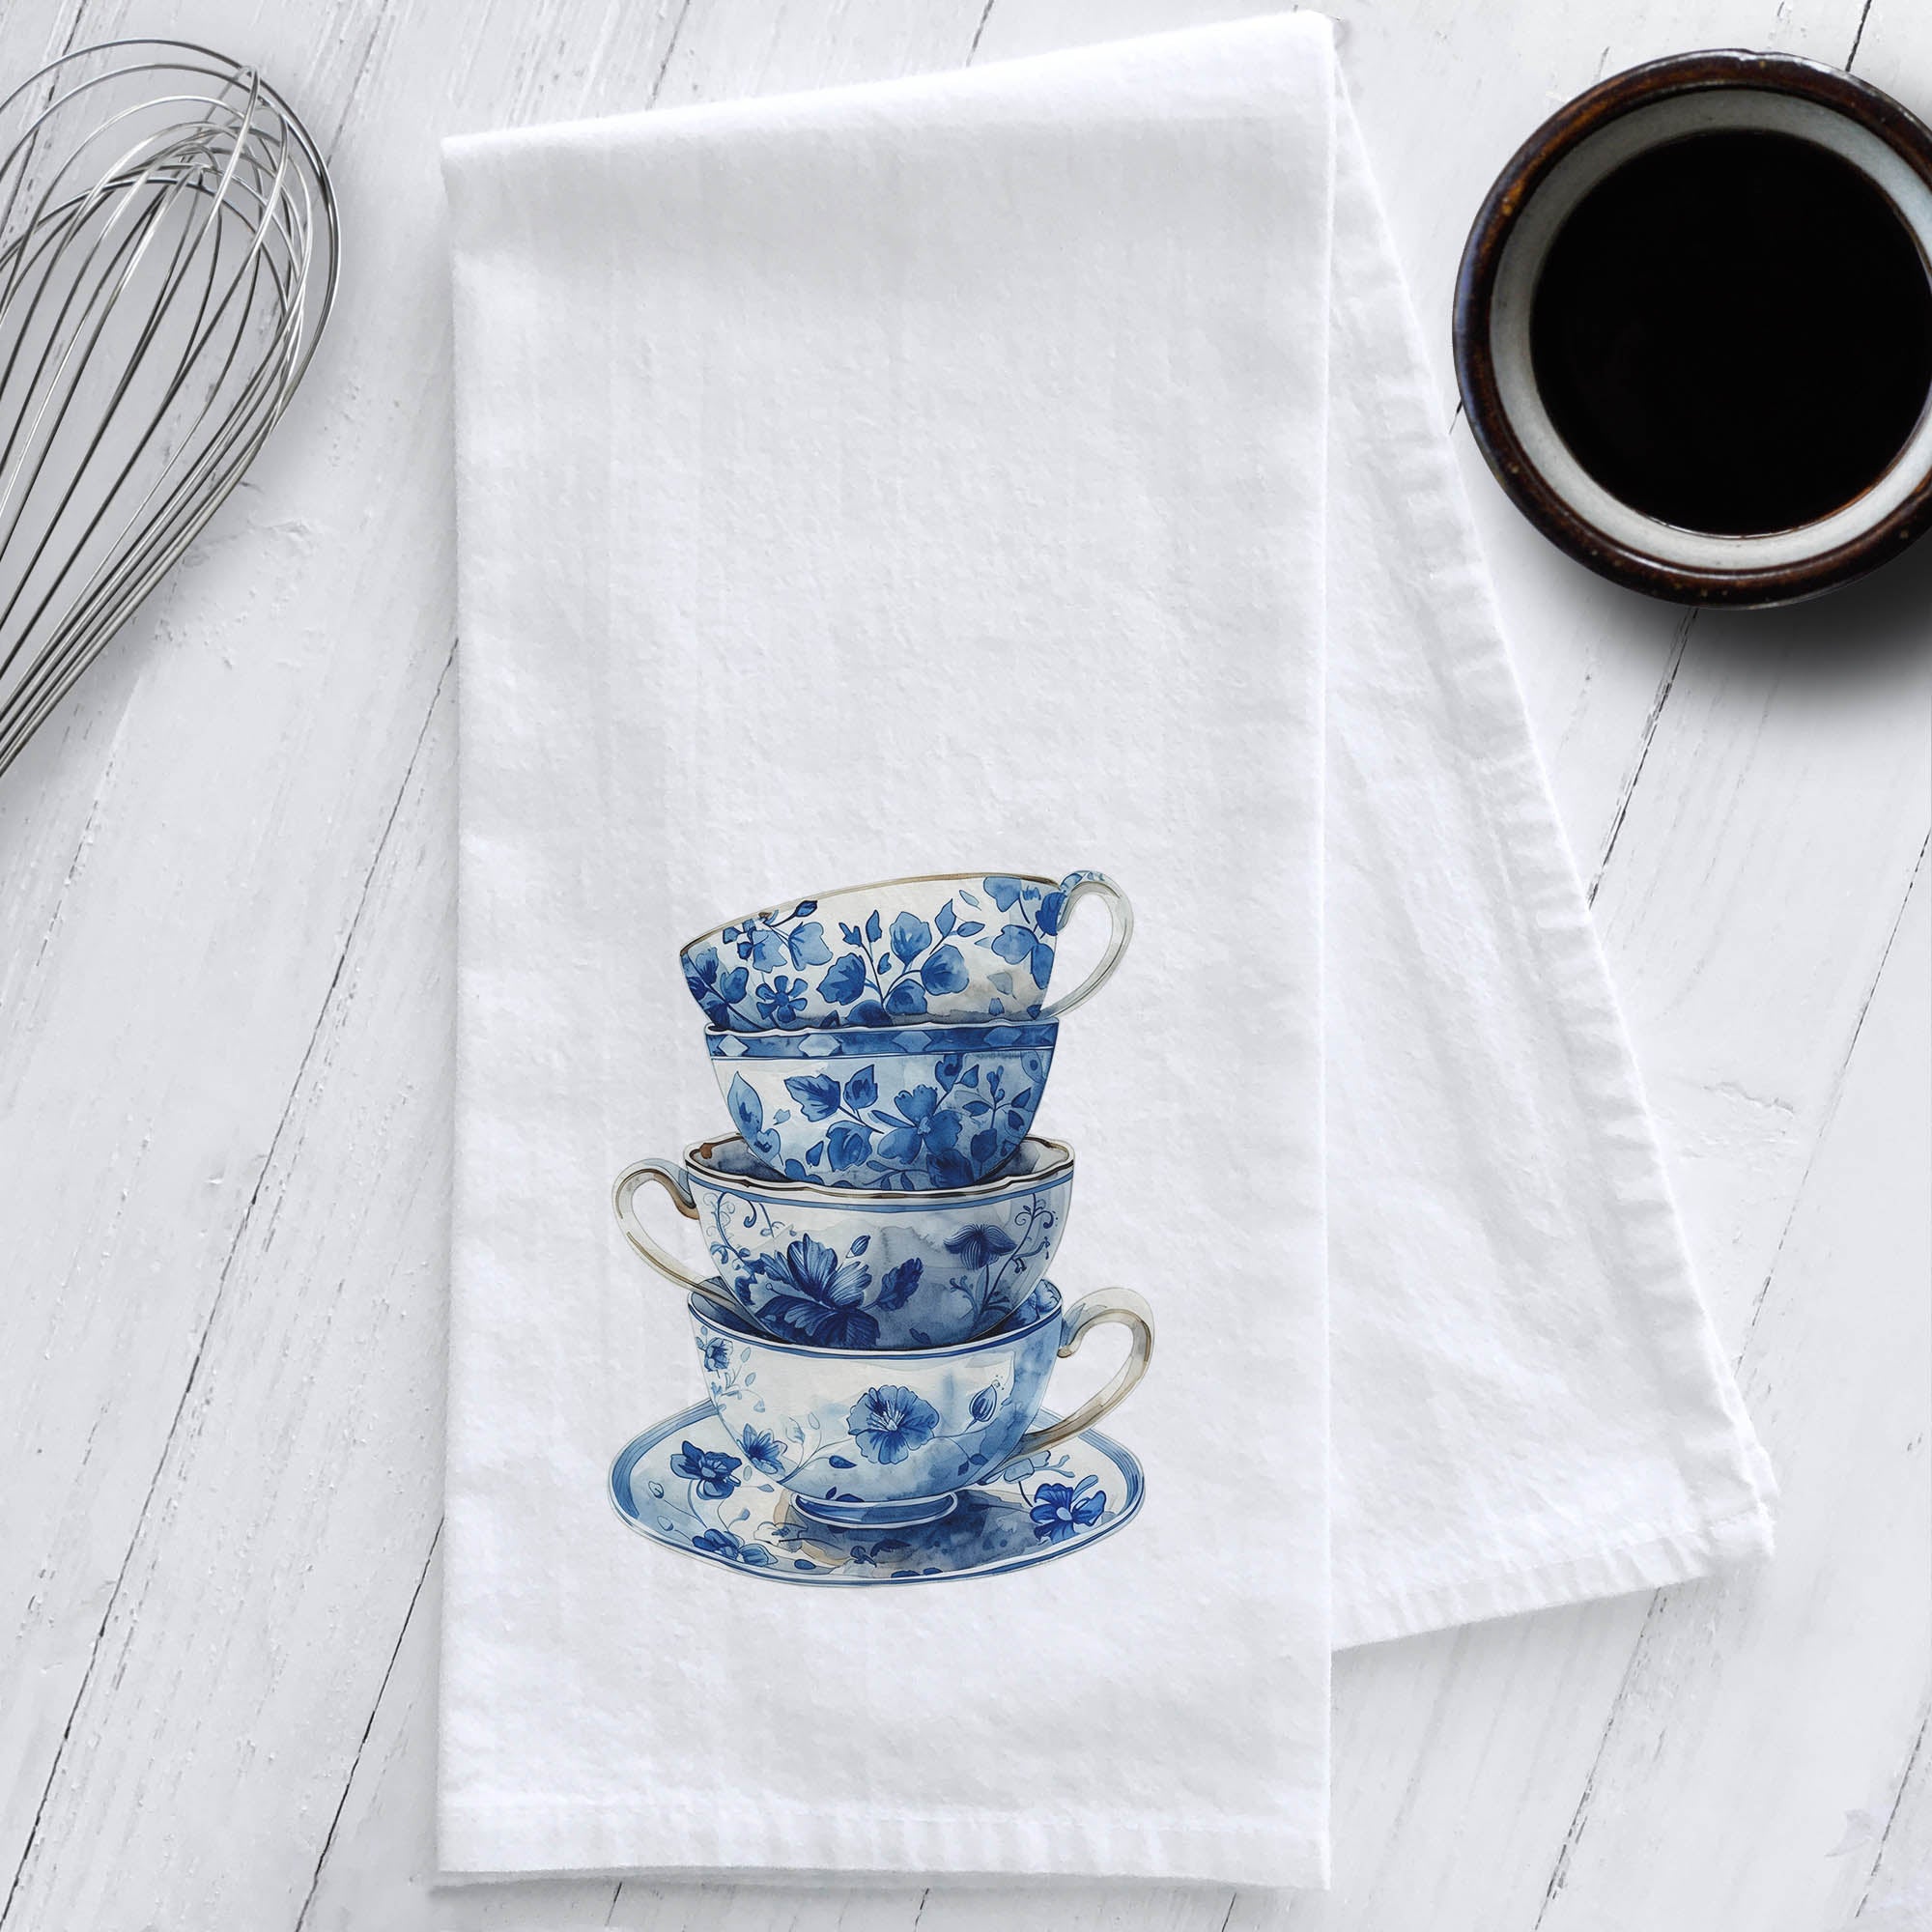 Stacked Blue and White Chinoiserie Teacups Tea Towel